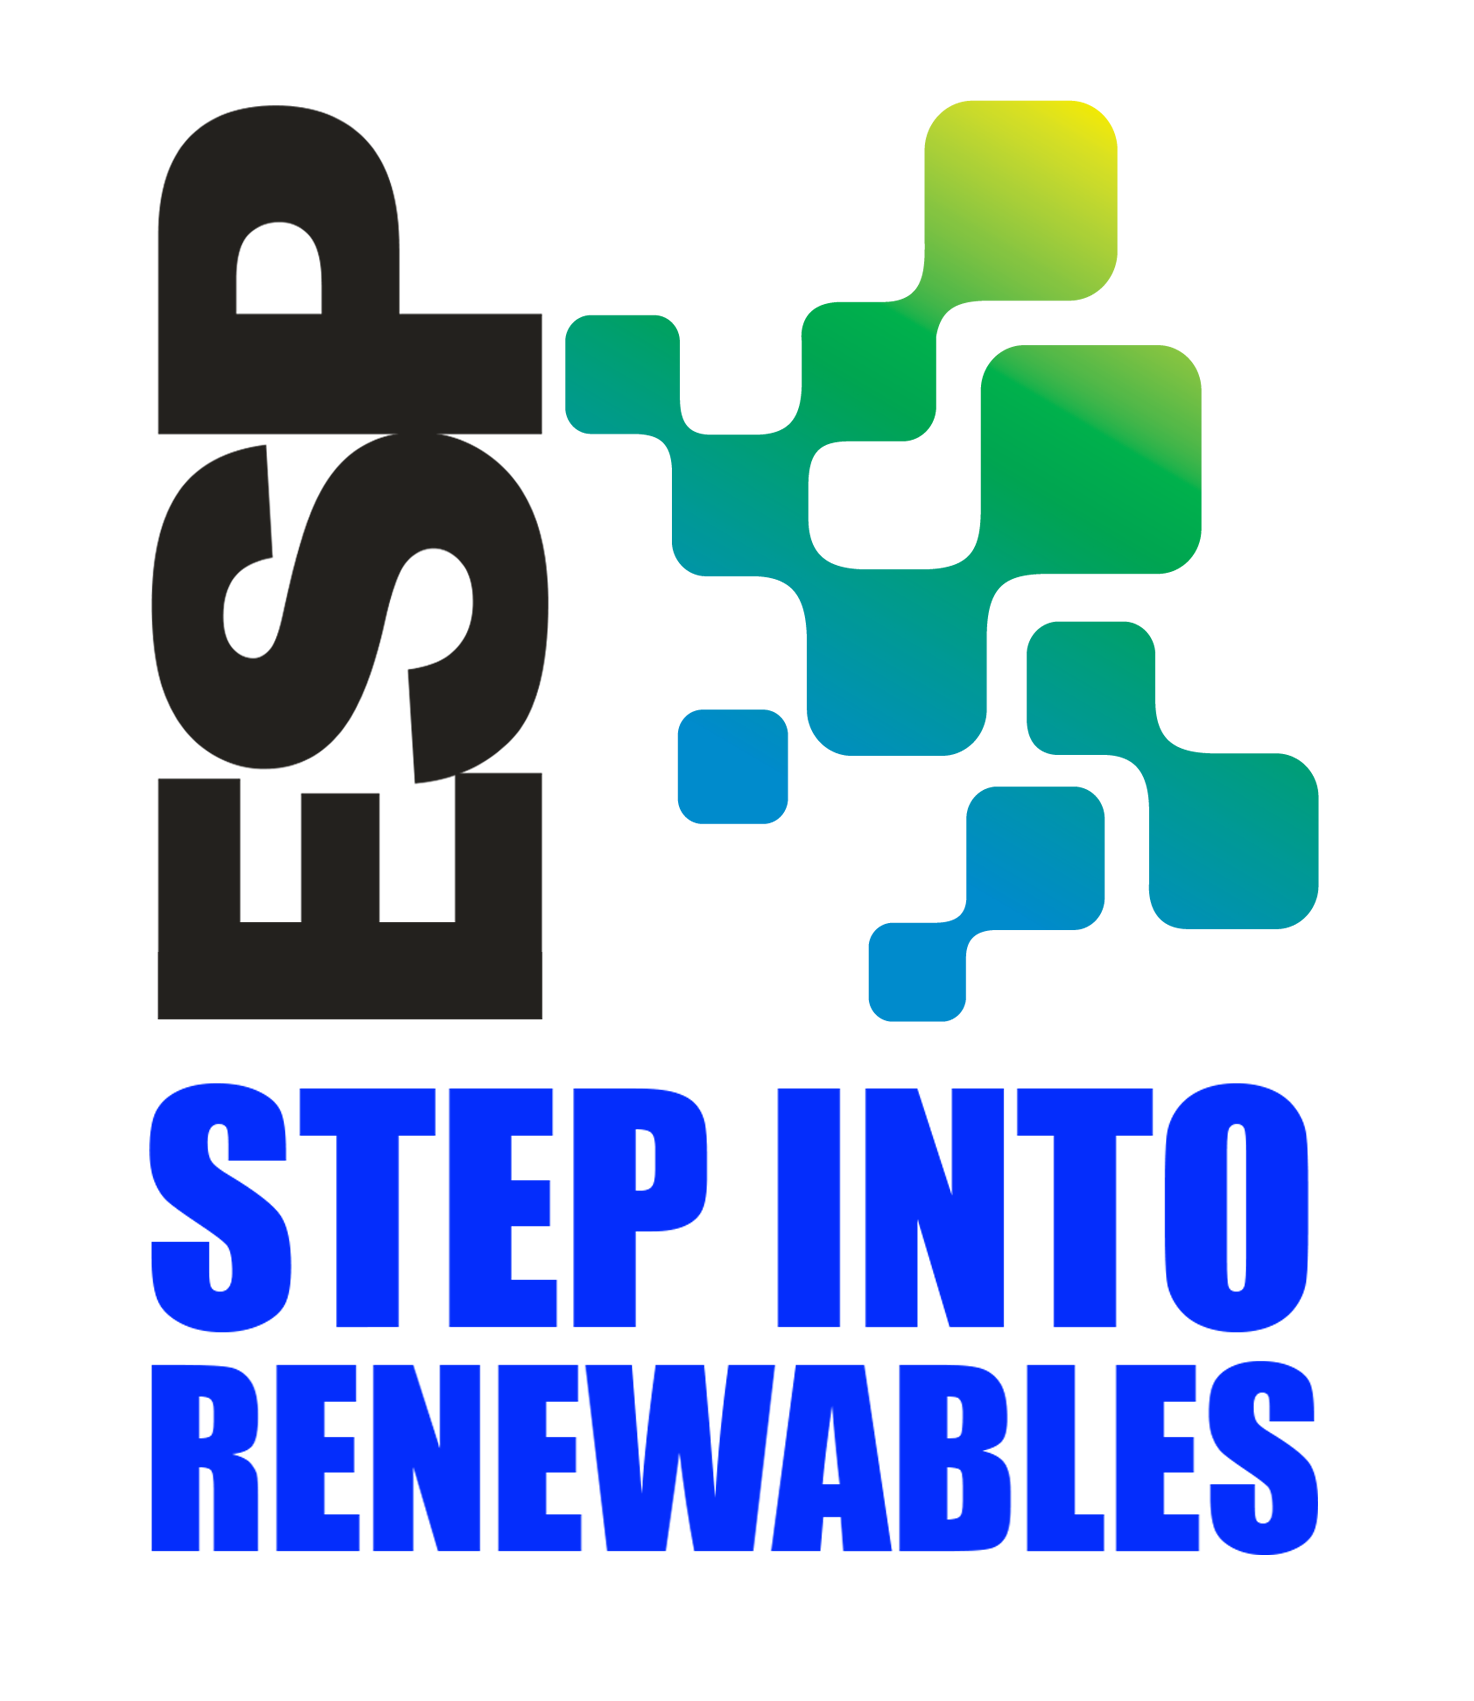 Visit our STEP Into Renewables page